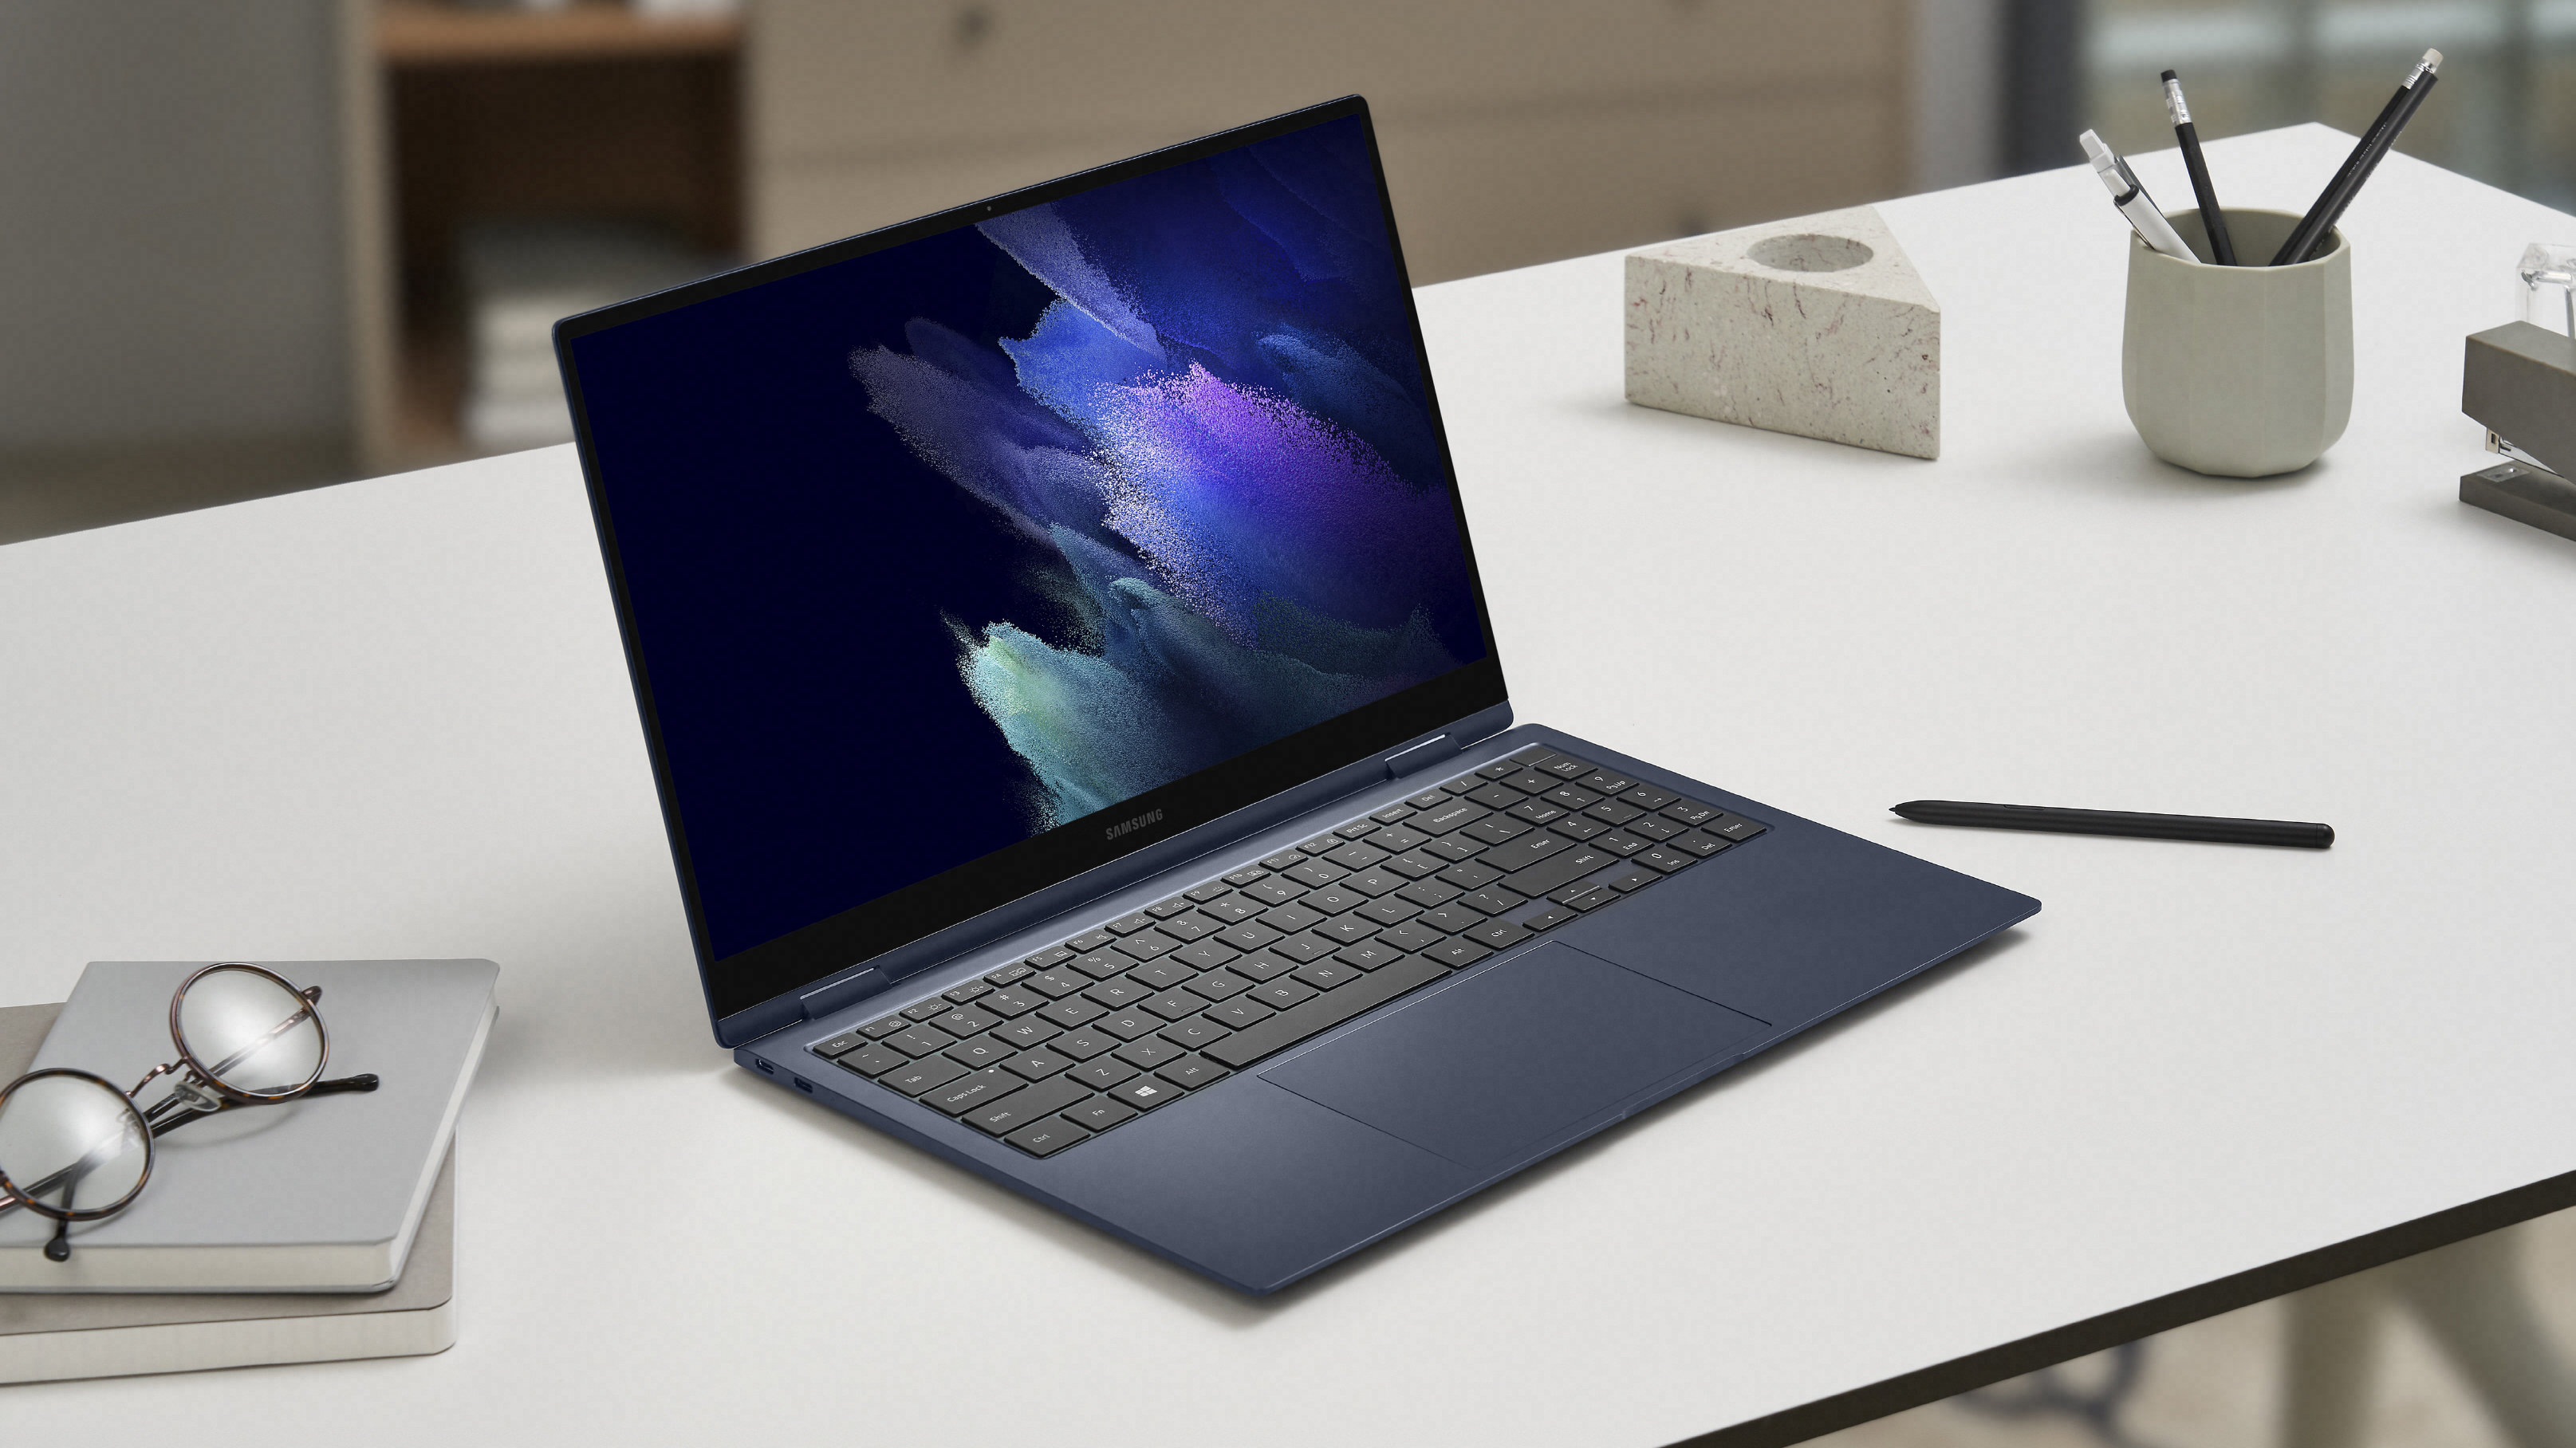 Samsung Galaxy Book Pro unveiled at Unpacked — this could be the first